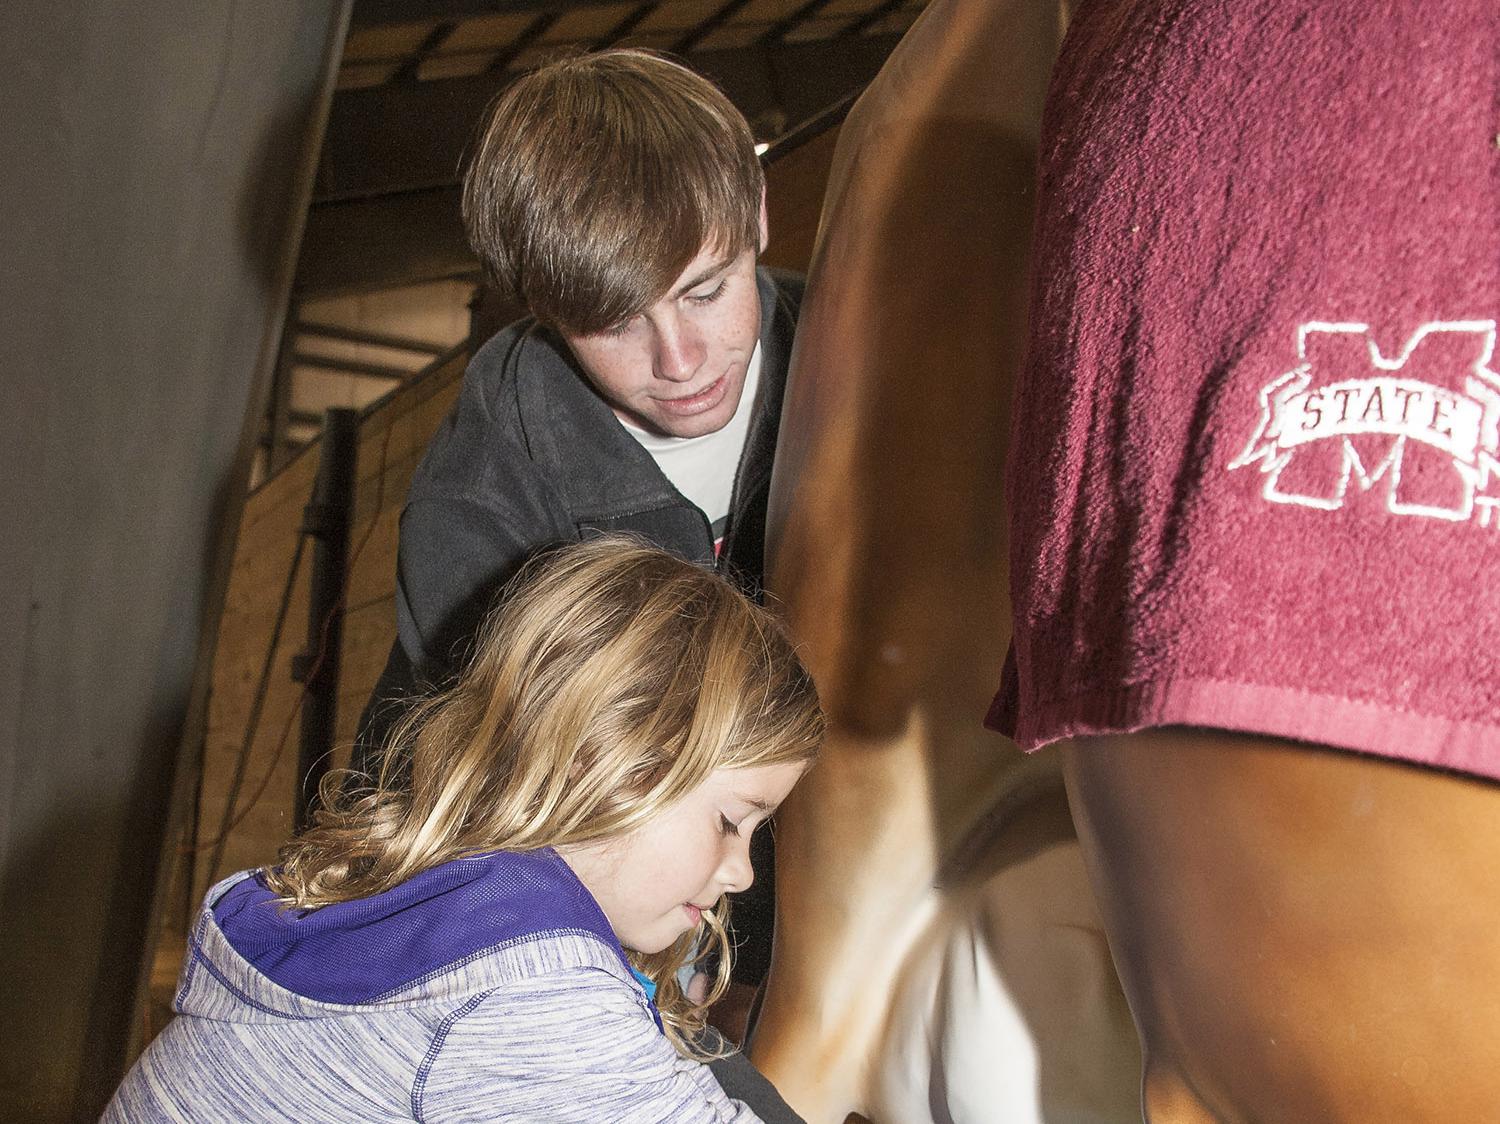 Sydney McReynolds of Starkville learns about milking cows with an imitation Jersey while Tucker Wagner, a junior in animal and dairy sciences at Mississippi State University, explains the process at the Mississippi Horse Park on Nov. 7, 2013. The demonstration was part of Farmtastic, a four-day educational program designed to help children learn the sources of their food, clothing and other products. (Photo by MSU Ag Communications/Scott Corey)